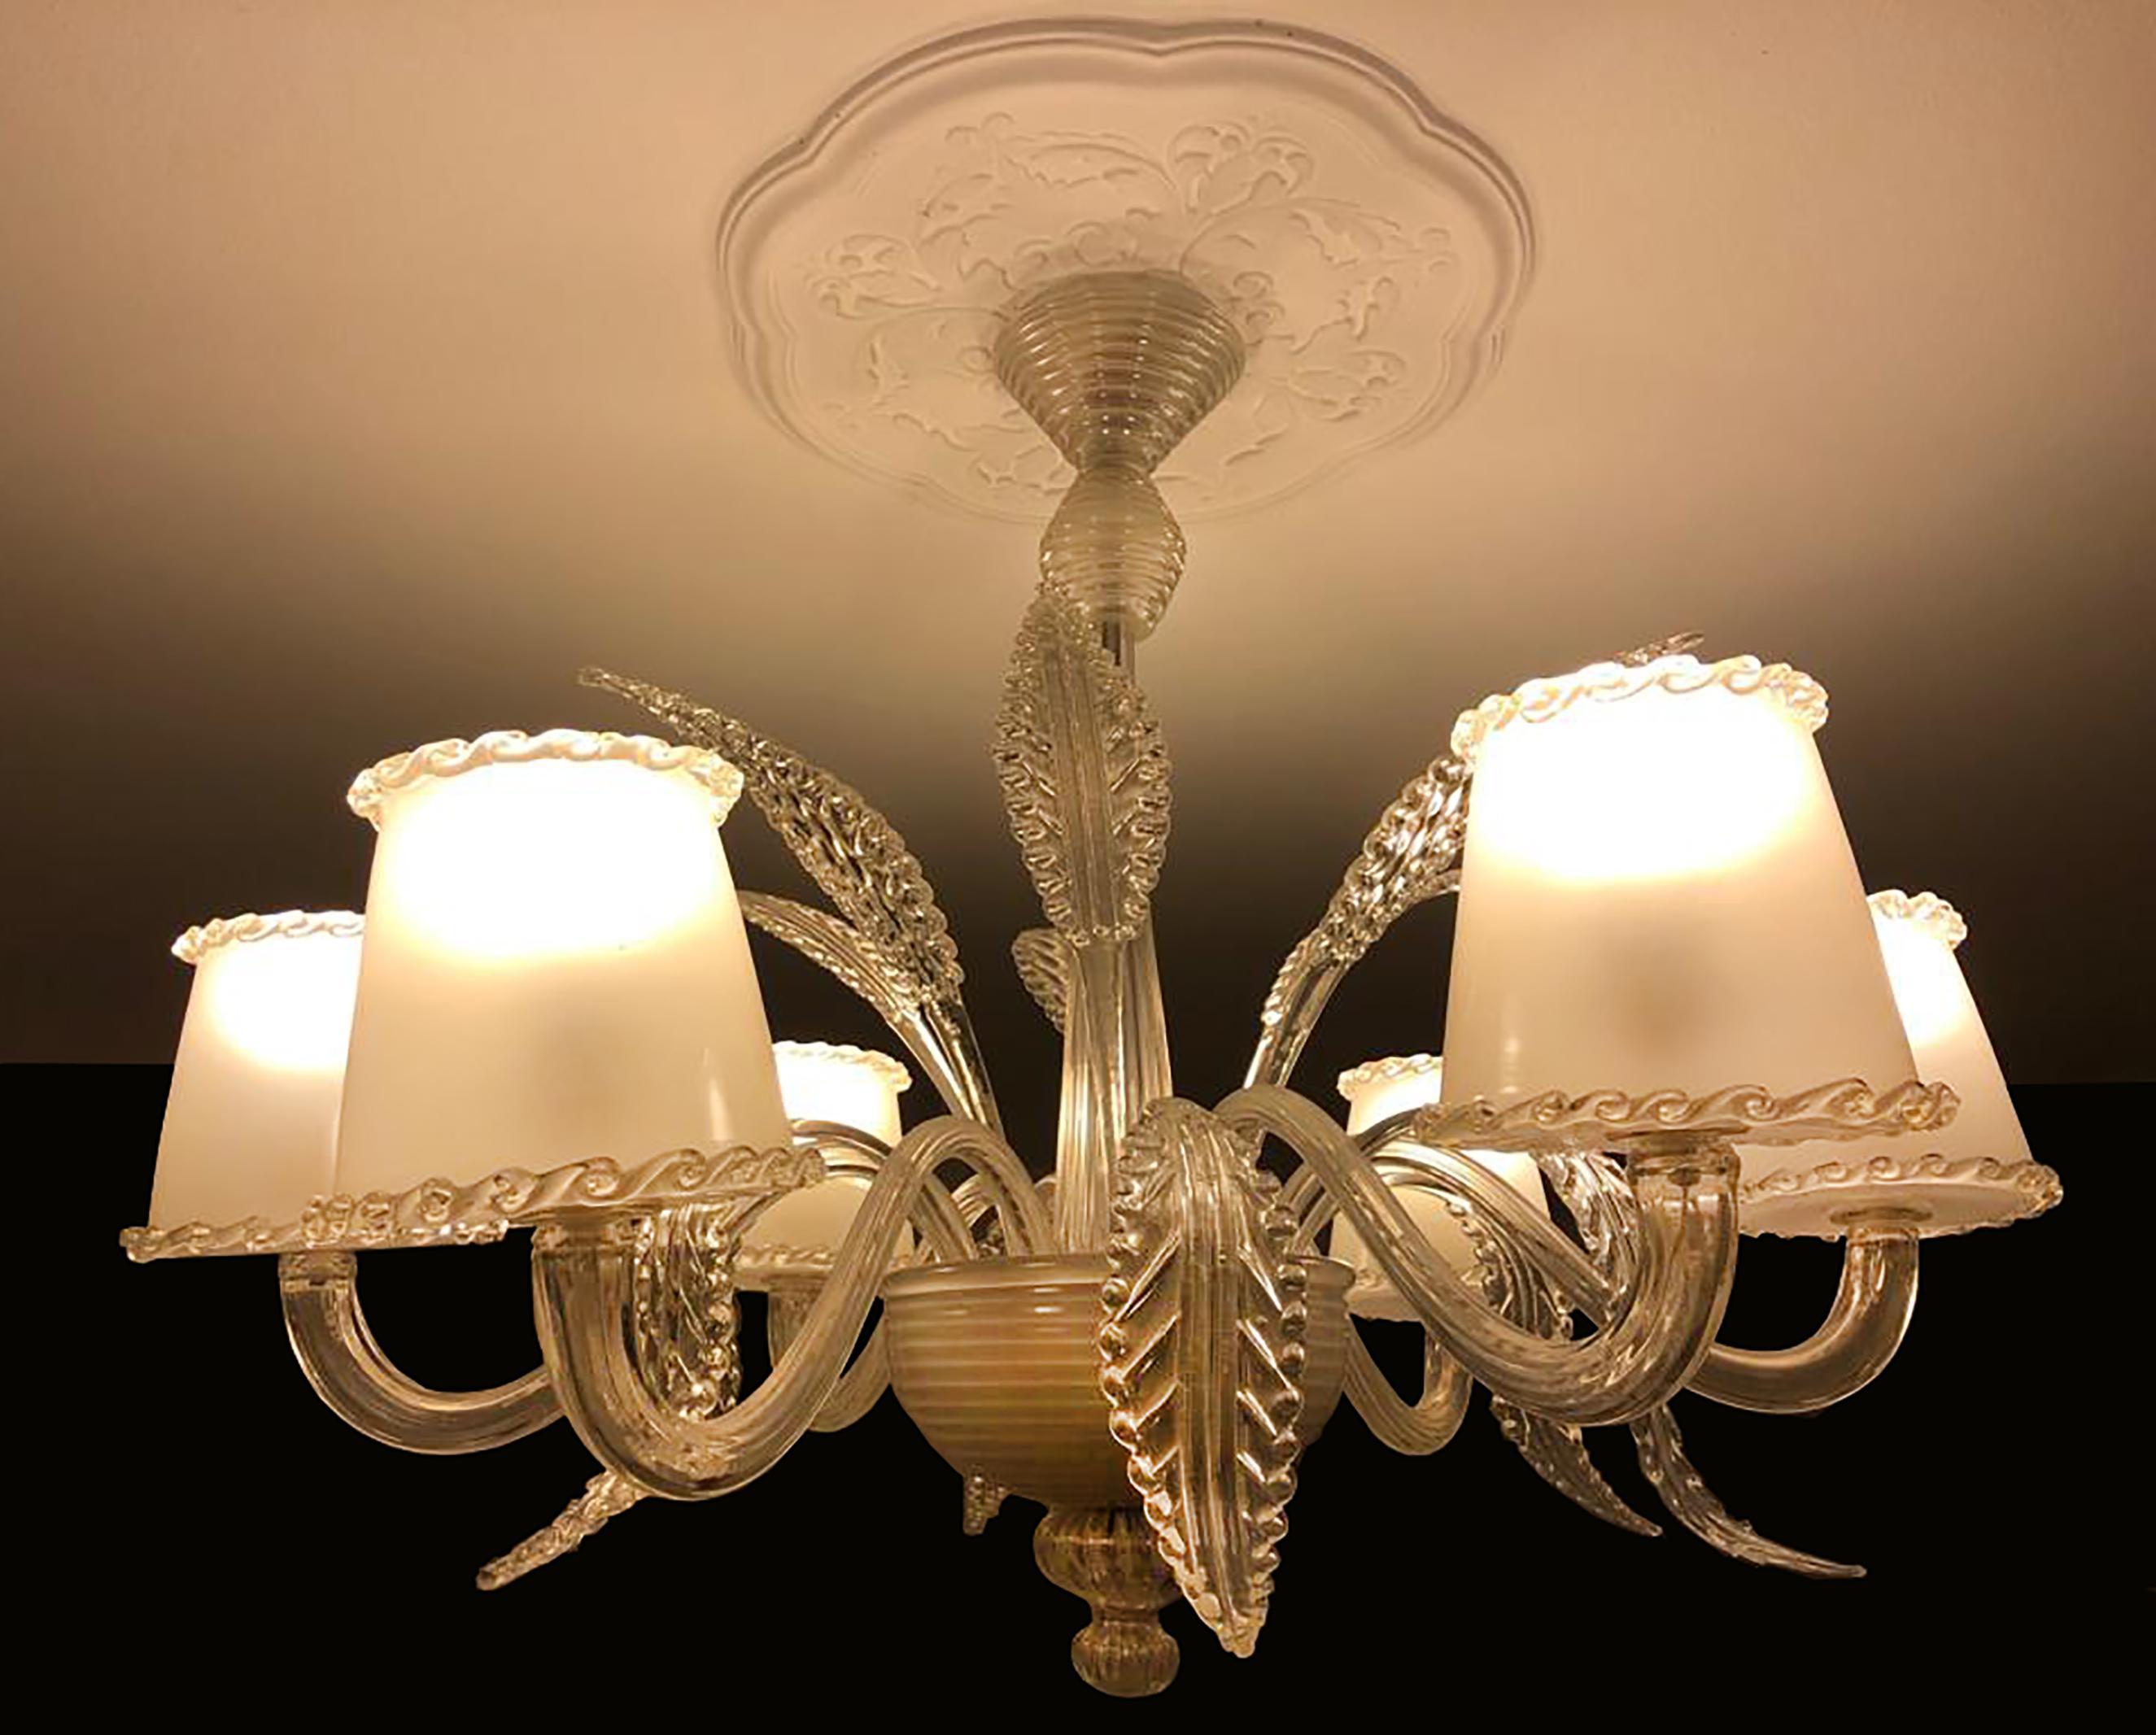 Mid-20th Century Italian Chandelier by Barovier & Toso, Murano, 1940s In Excellent Condition For Sale In Budapest, HU